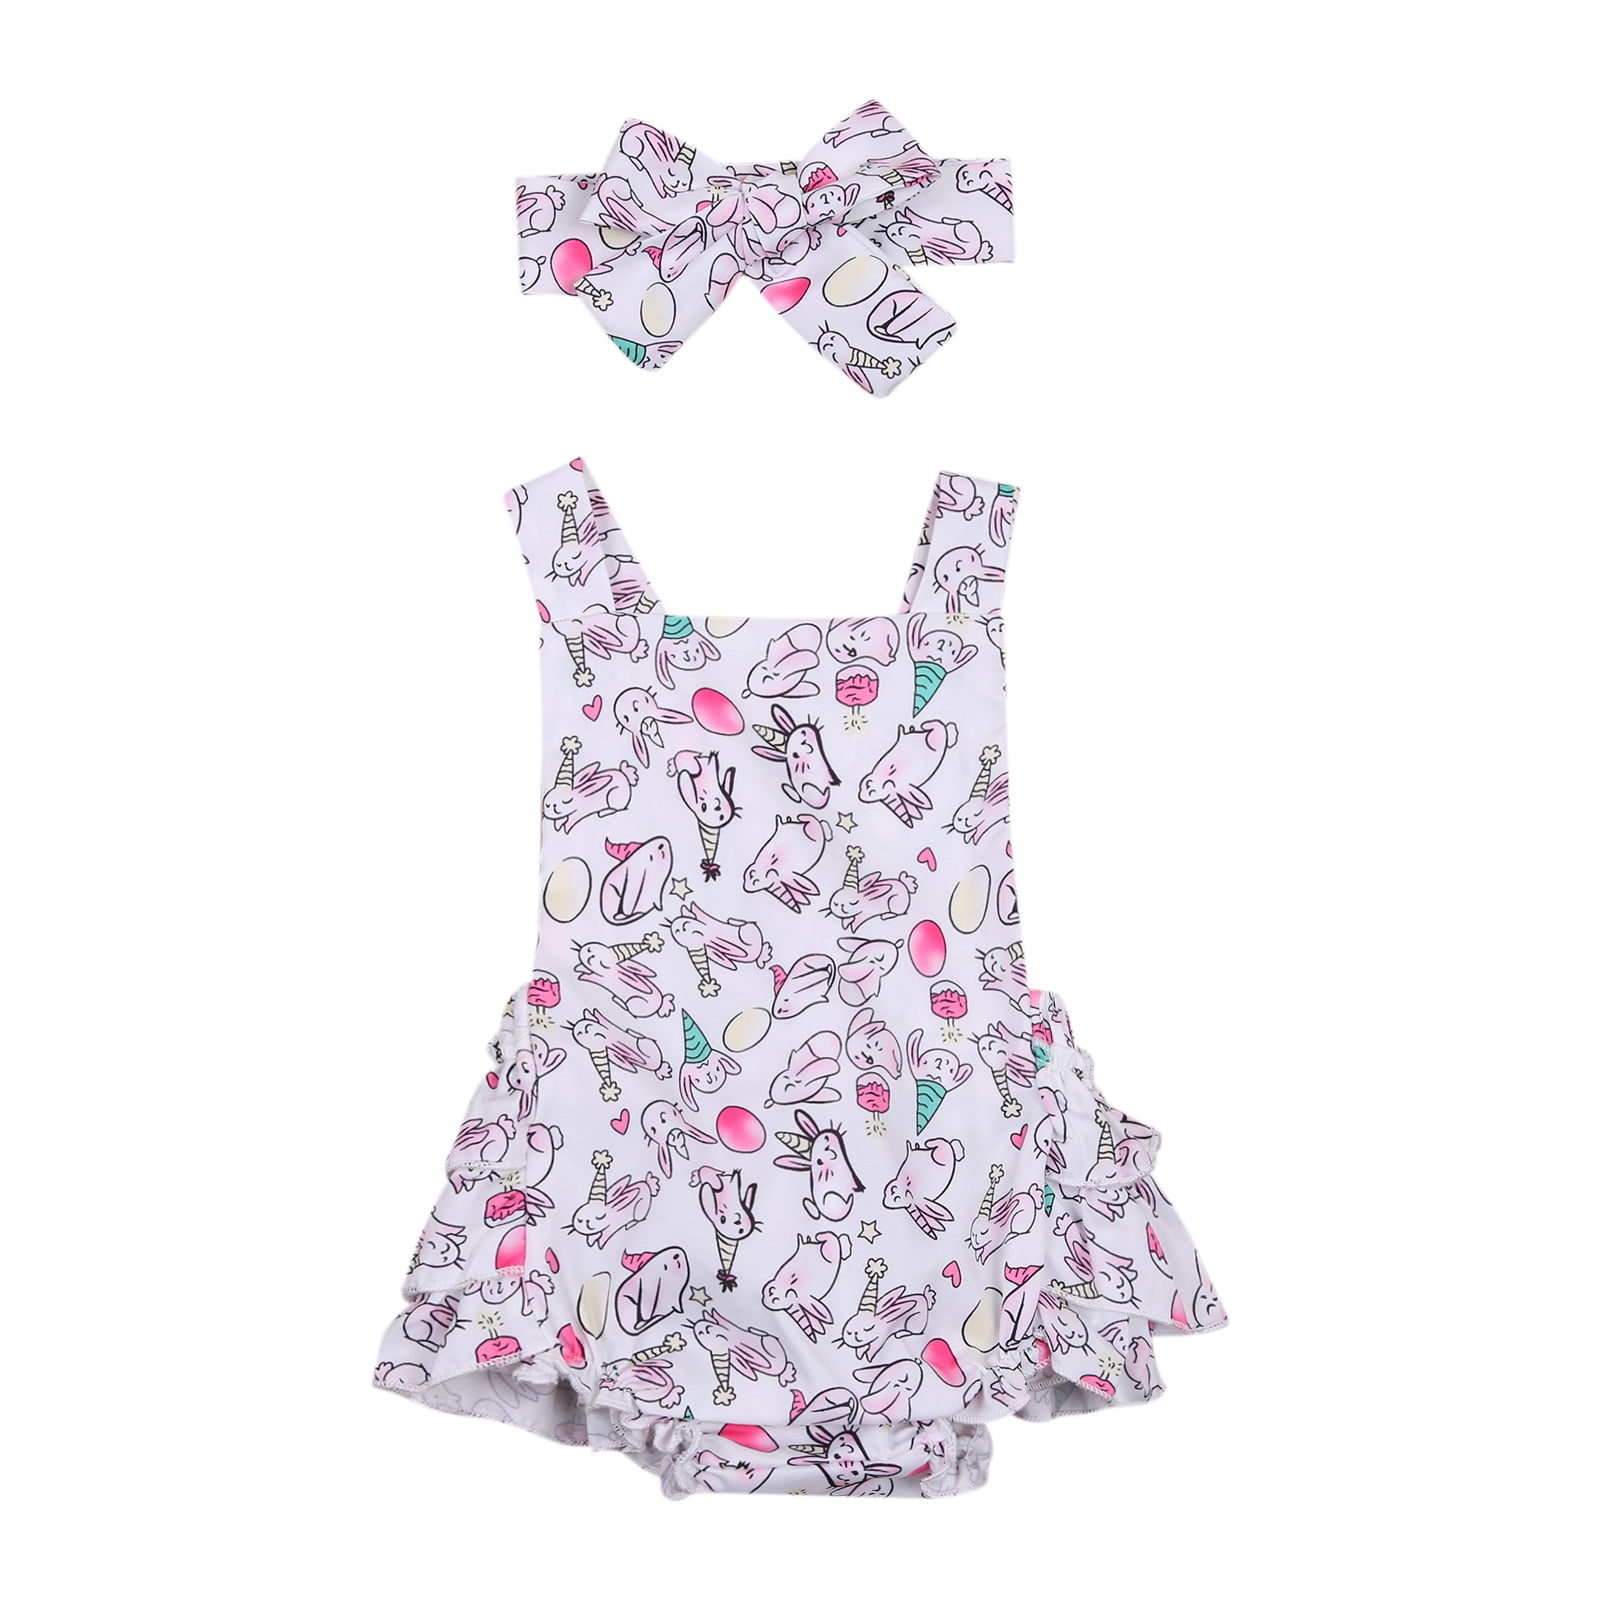 Little Story Baby Outfits Clothes,Infant Baby Girls Short Sleeve Romper+Easter Rabbit Print Suspender Skirt Set Girls Outfits&Set Baby Clothing for Easter